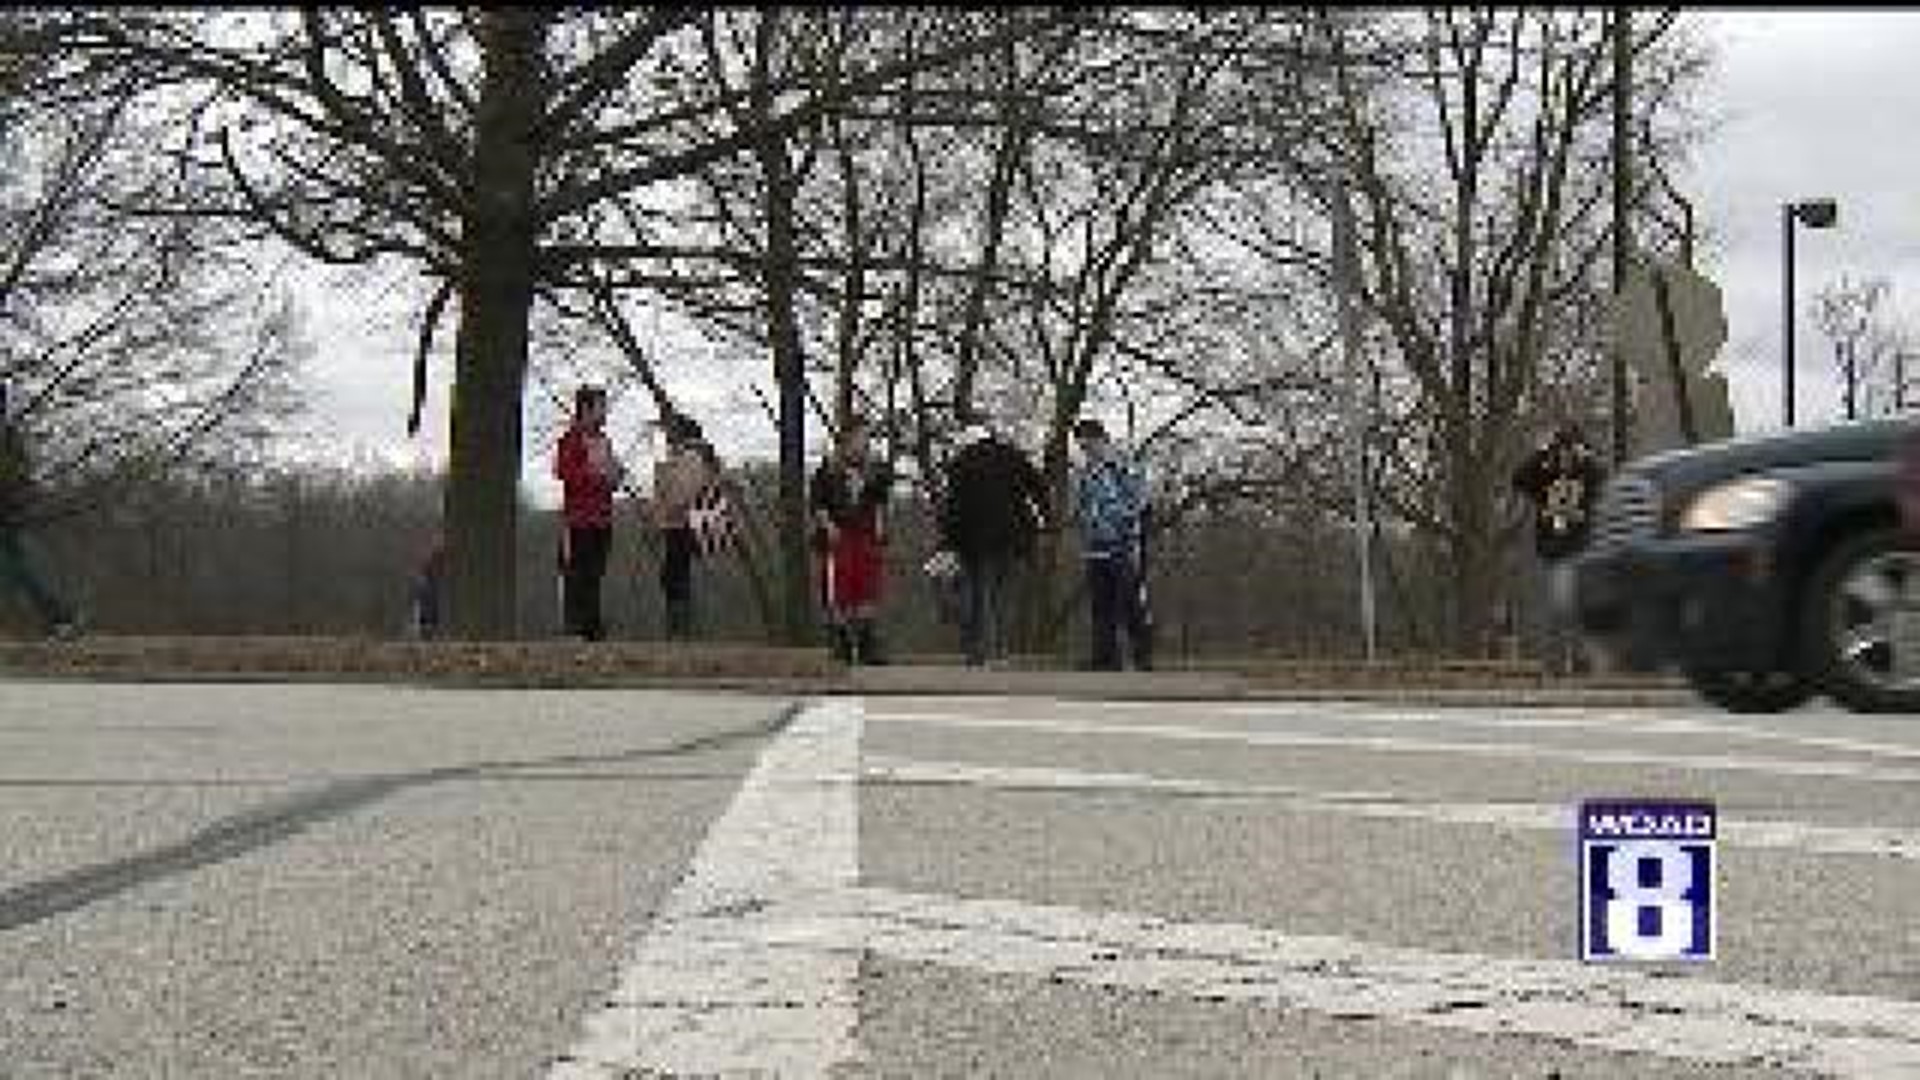 Parents Say Traffic Surrounding School Is Unsafe